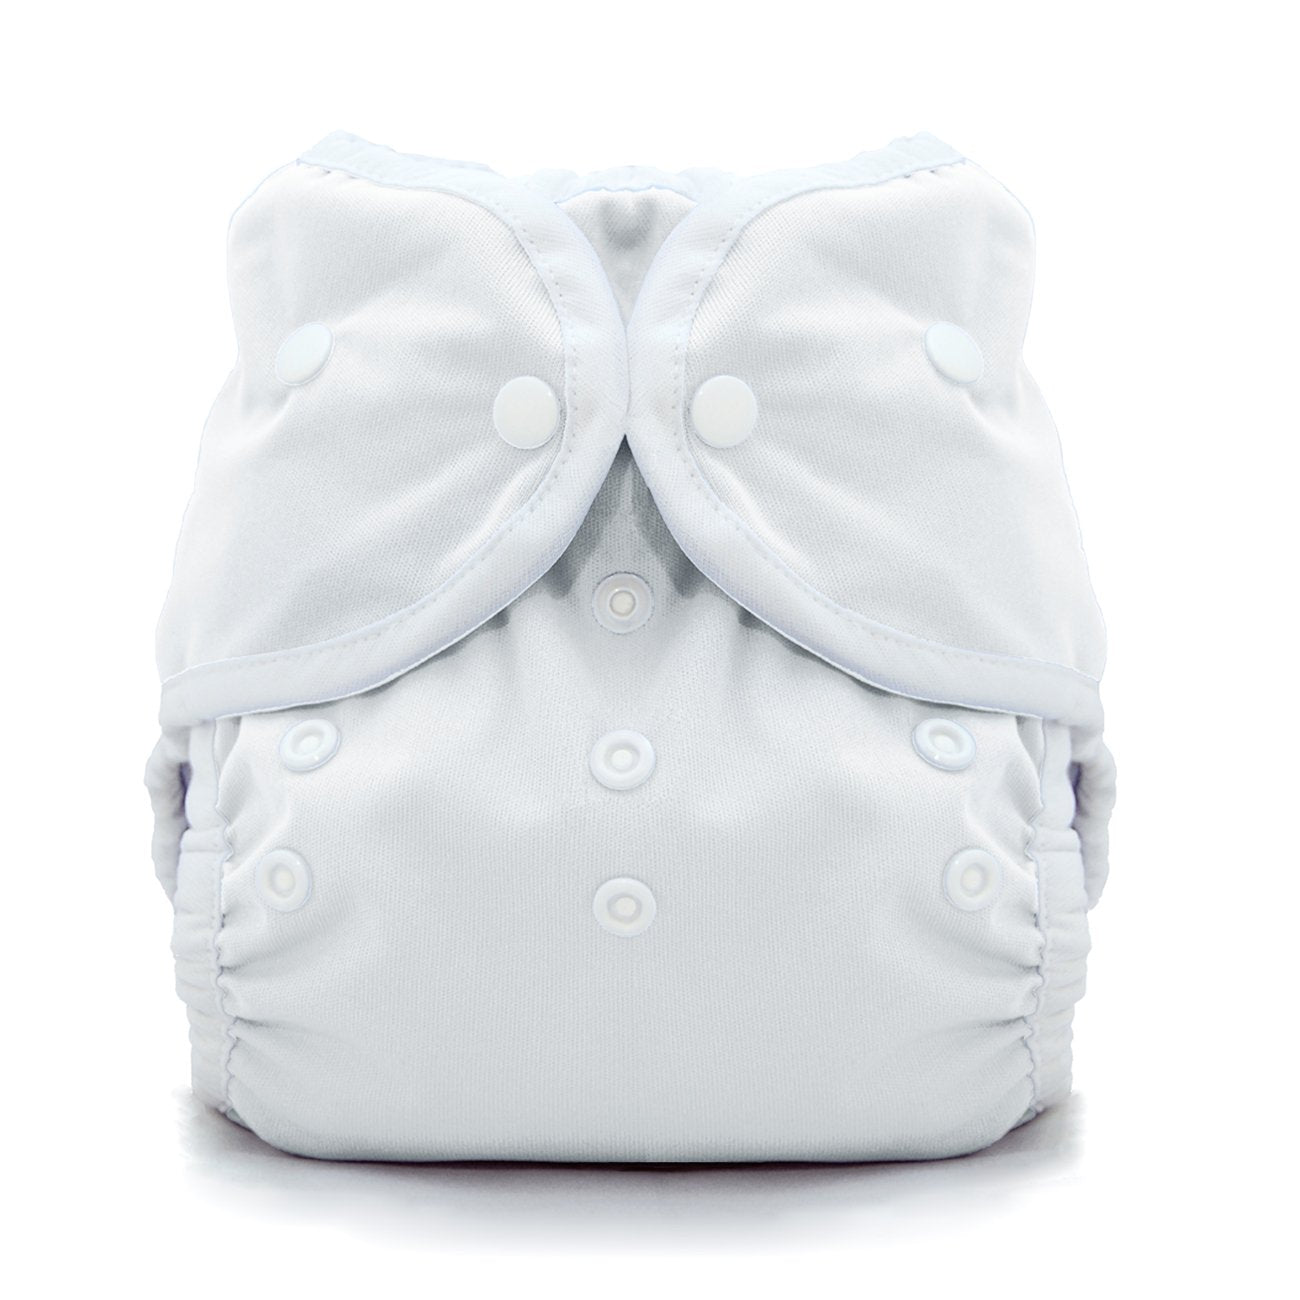 Image of Thirsties Snap Duo Wrap White Size One diaper